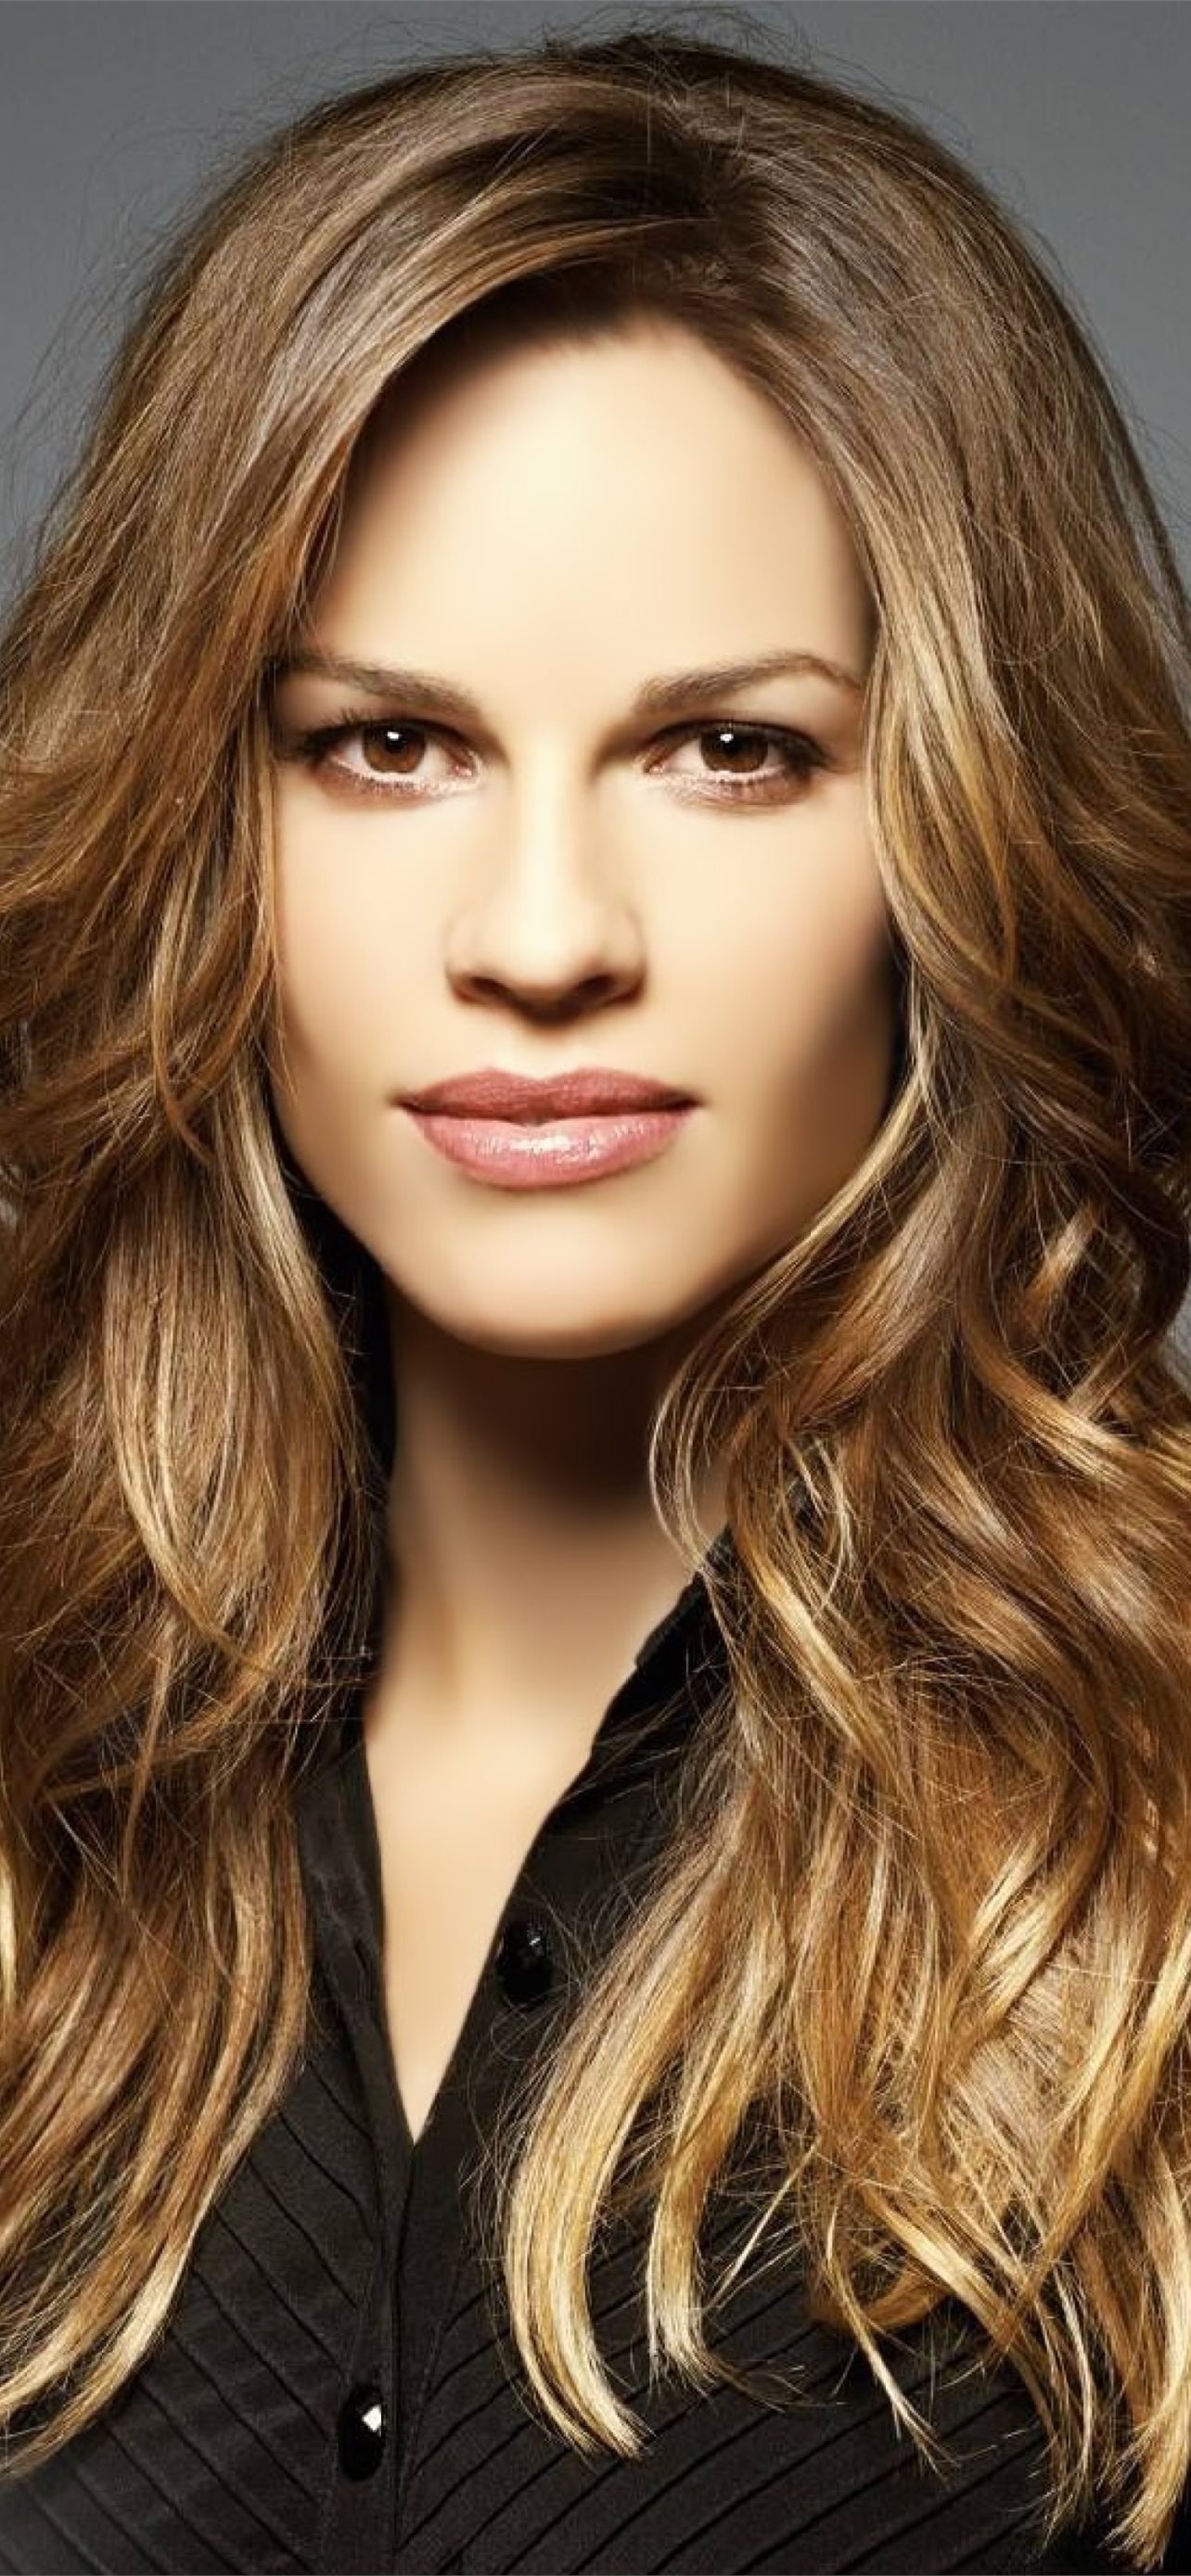 Hilary Swank: A cast member of the popular TV series Beverly Hills 90210. 1290x2780 HD Background.